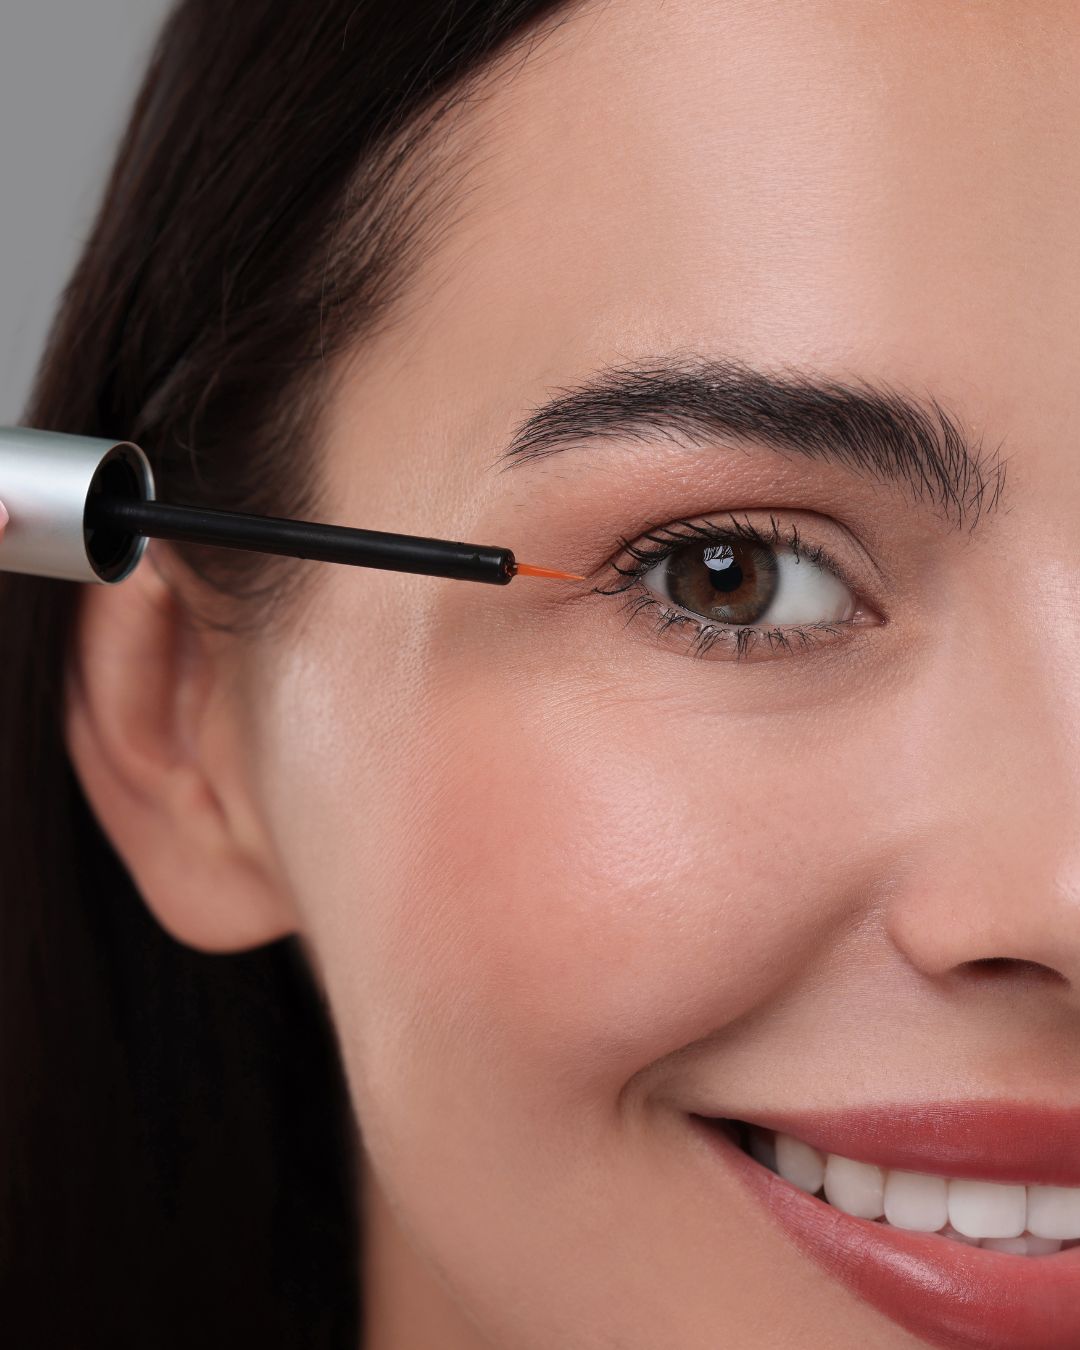 Take the tip of the wand and draw it slowly over the root of your eyelashes. Try to do this in one continuous stroke for the most effective application.